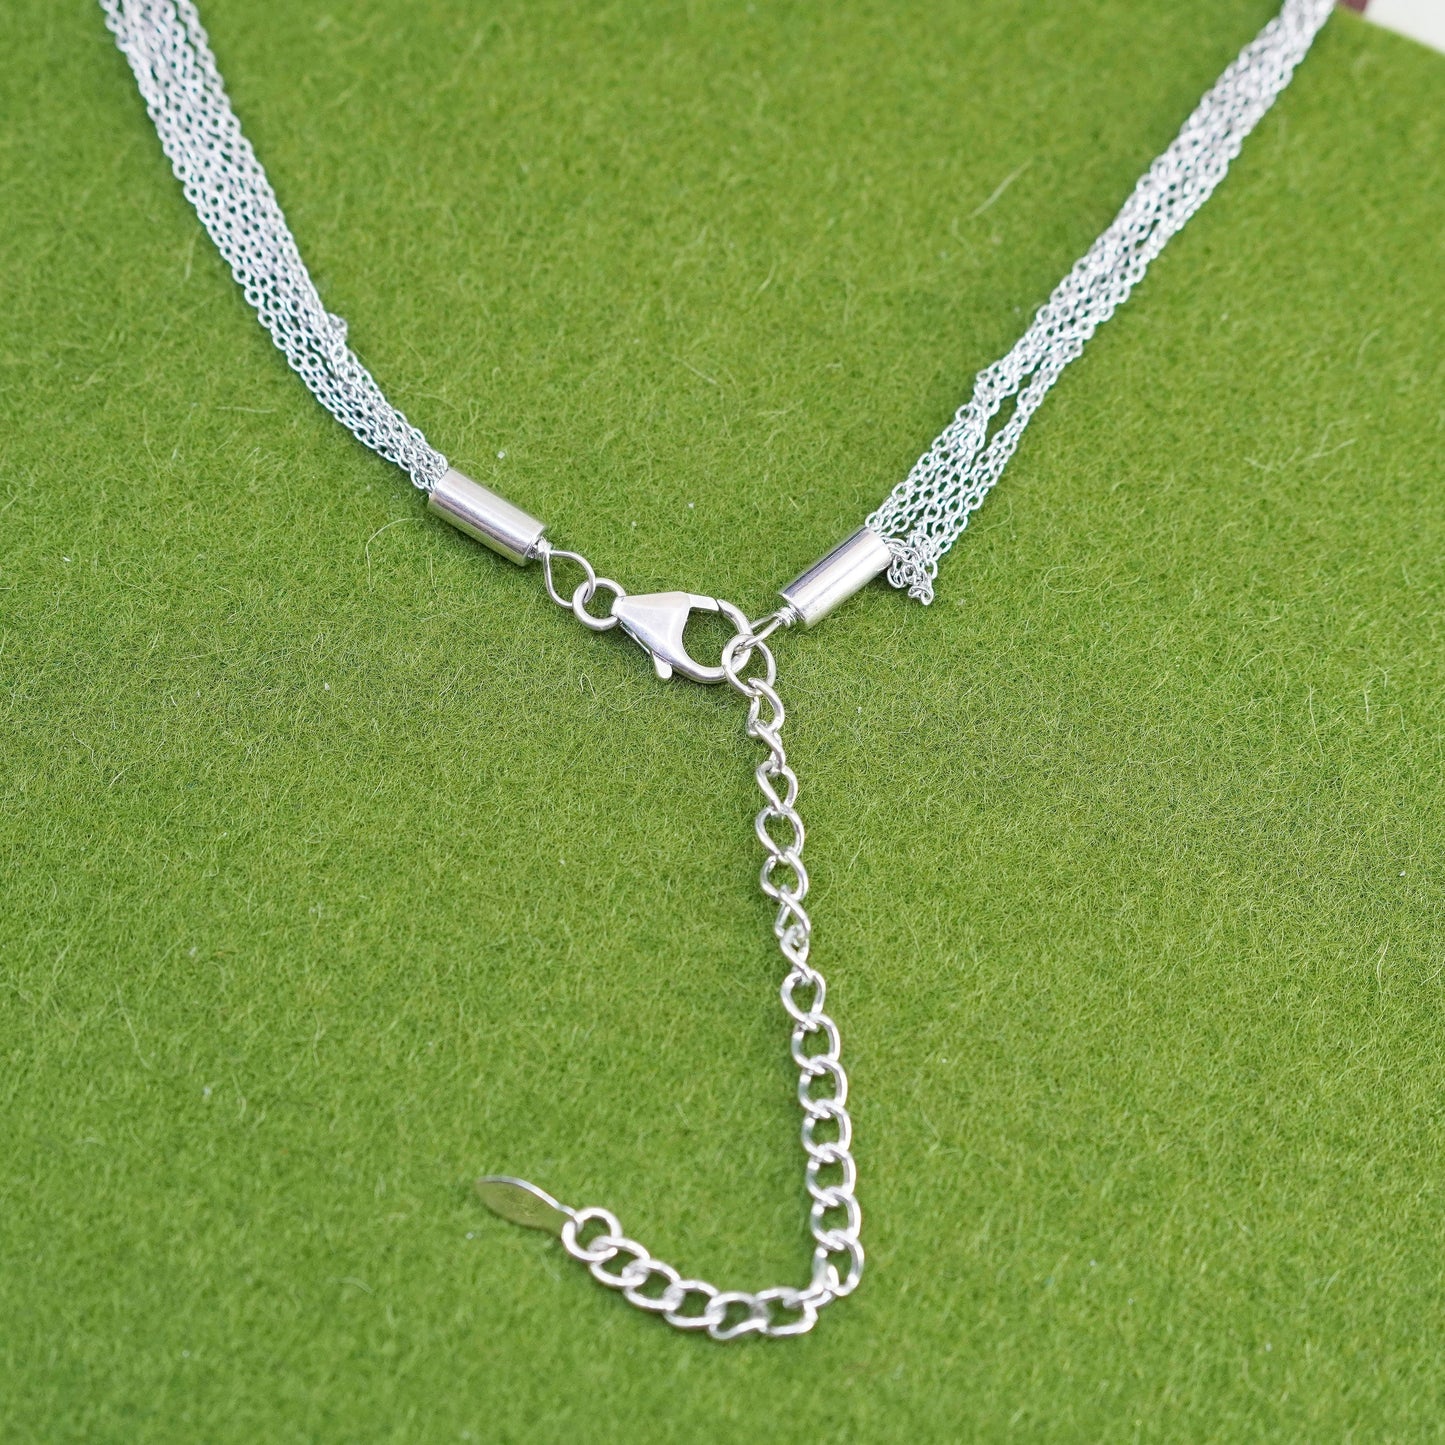 14+3”, Sterling silver necklace, Italy 925 strands circle chain heart pendant